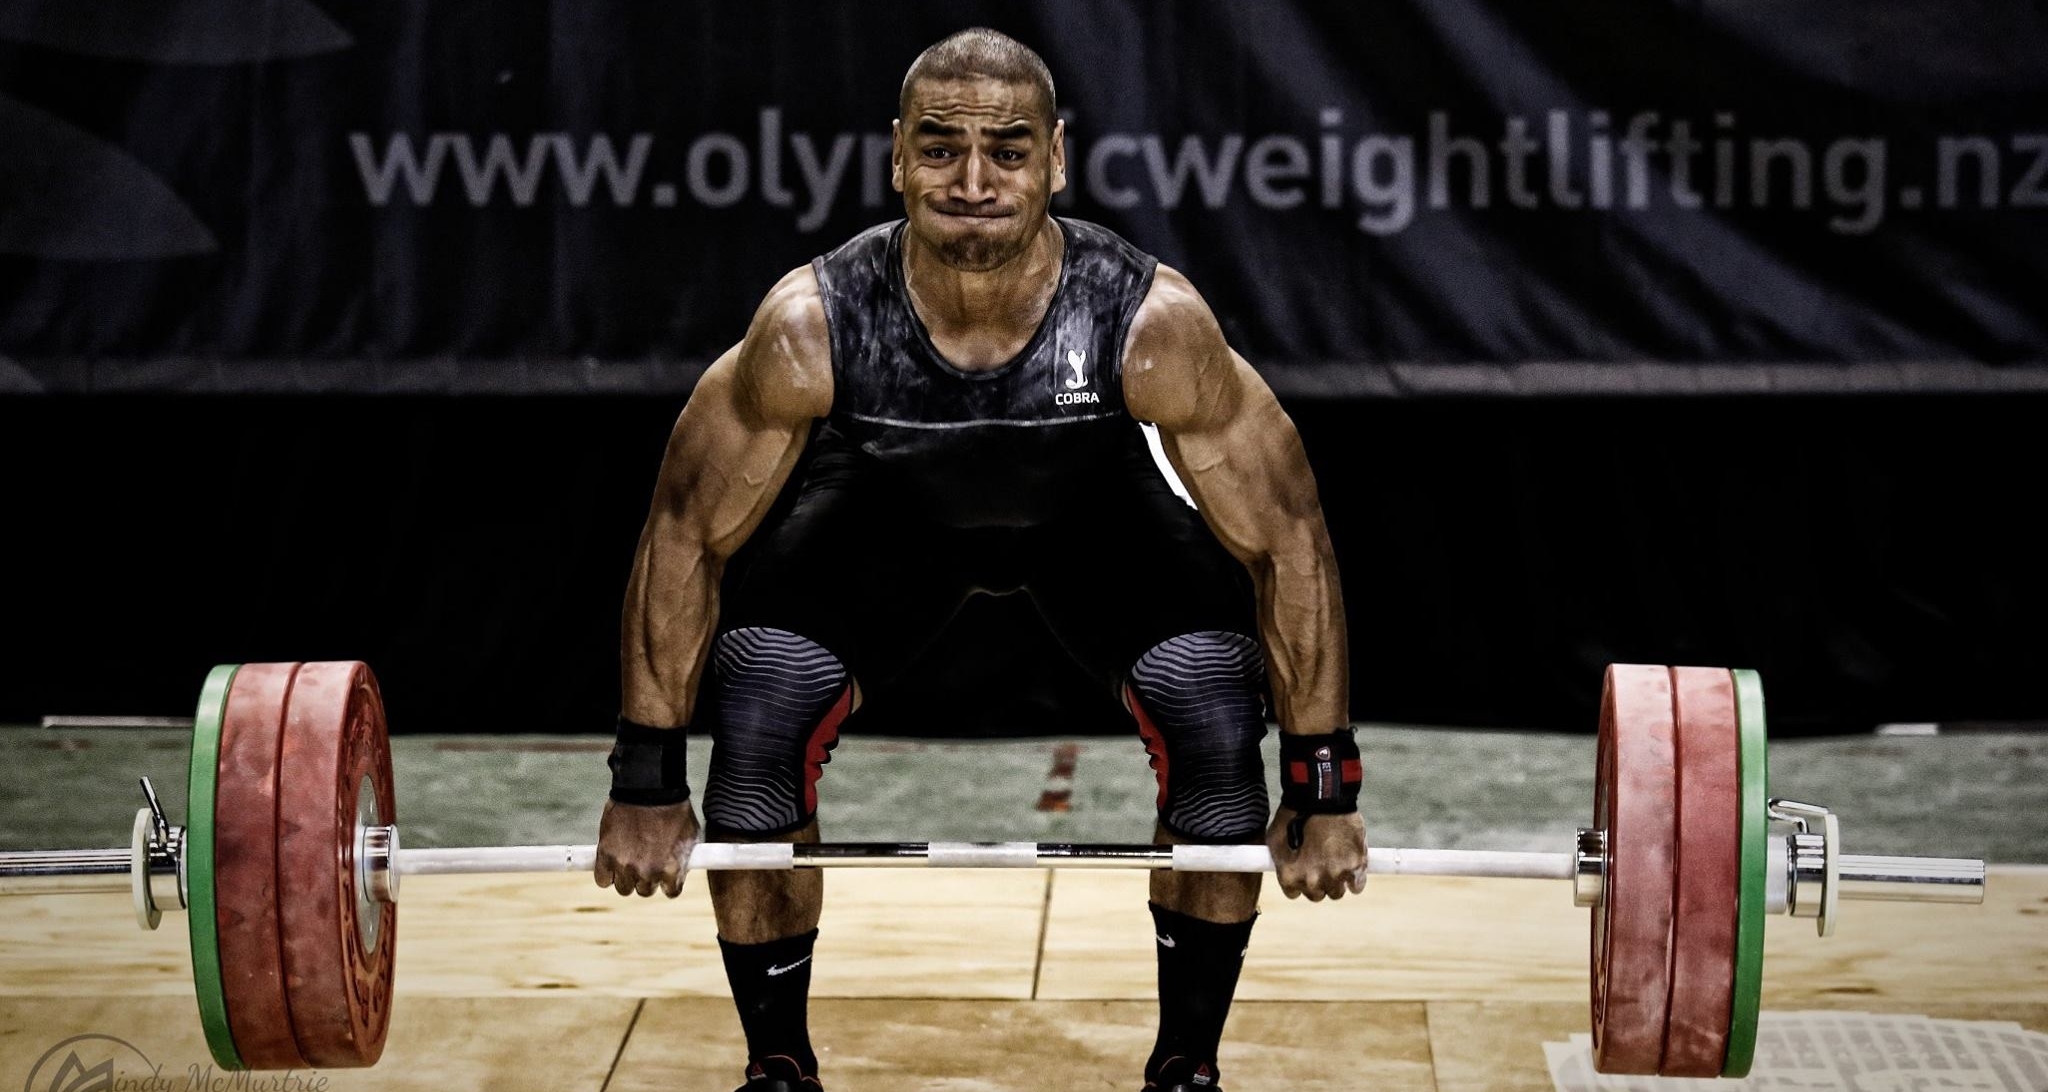 Our Suits & Singlets — Cobra Weightlifting